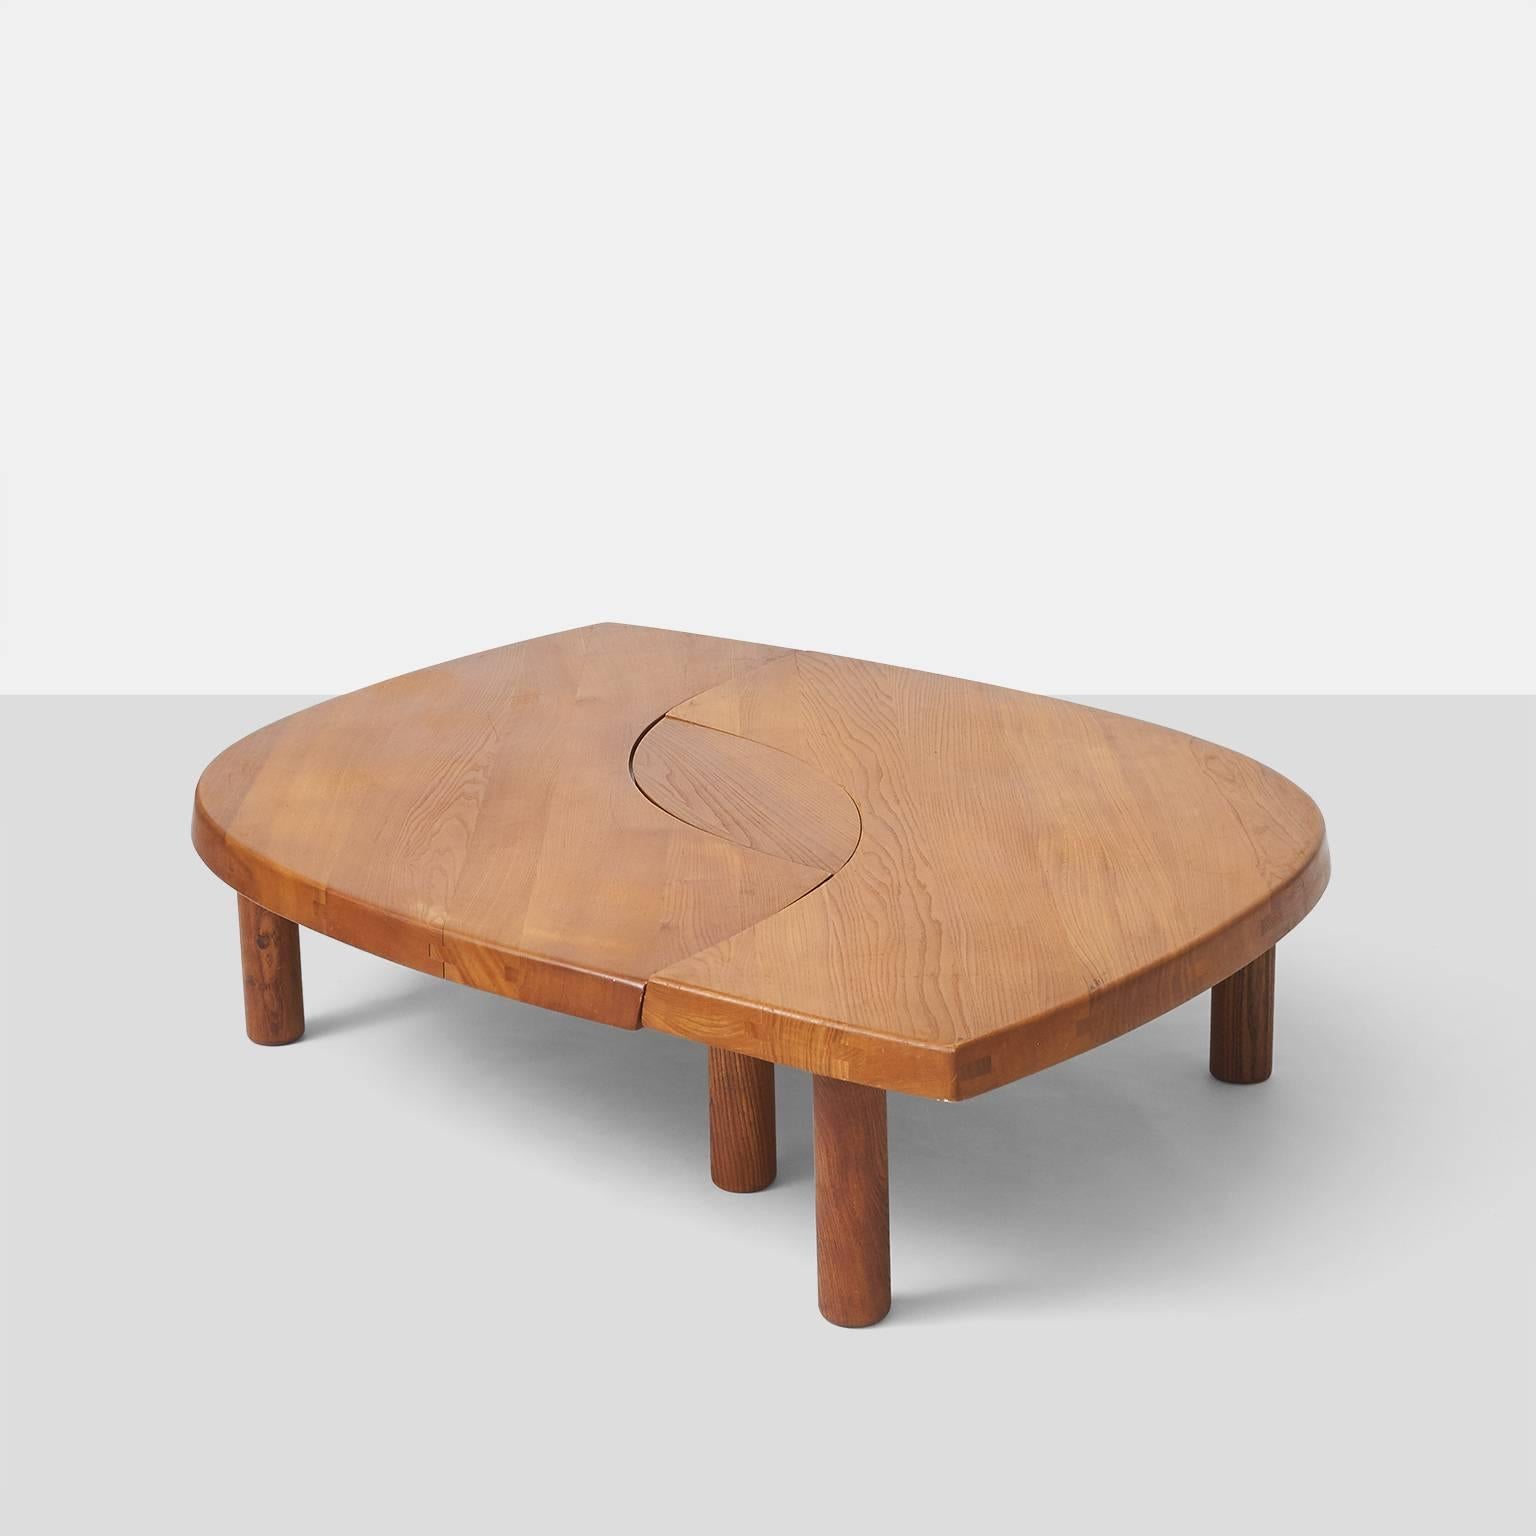 A coffee table in elm wood by Pierre Chapo. Unlimited arrangements allow this to be used a one or two different coffee tables as well as a bench. Beautiful original patina.